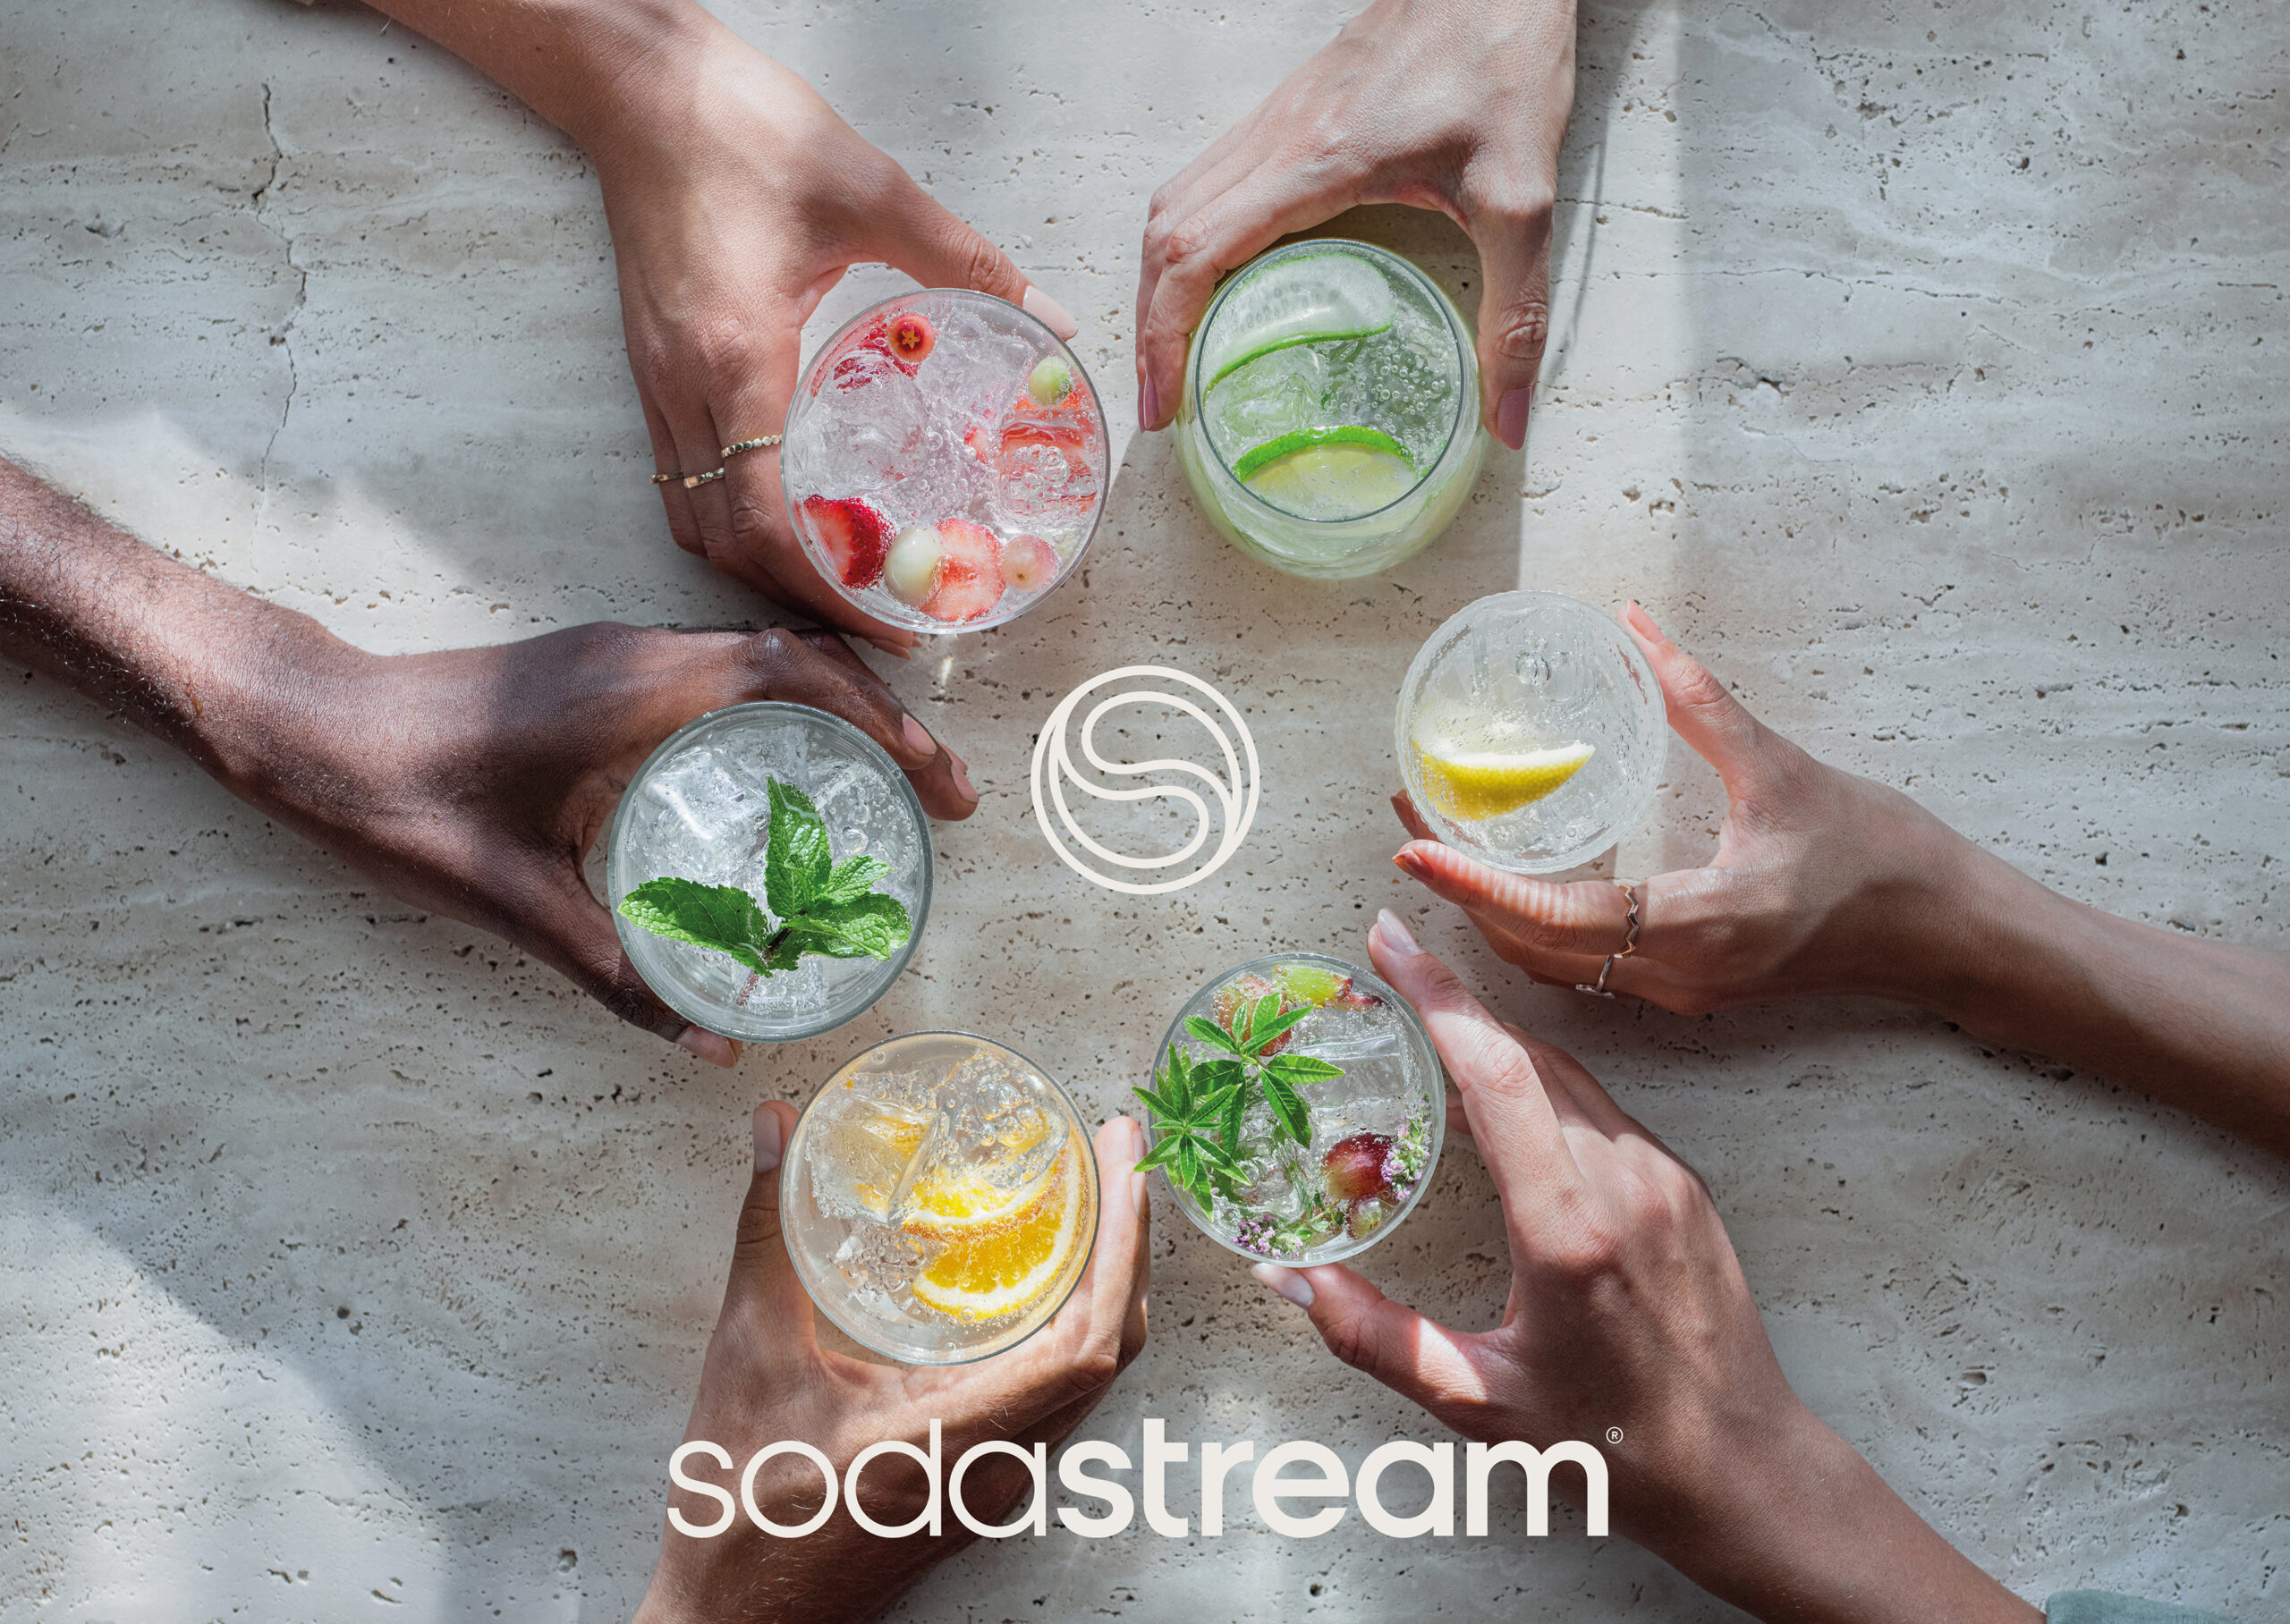 Sodastream Push for Better In New Campaign photo